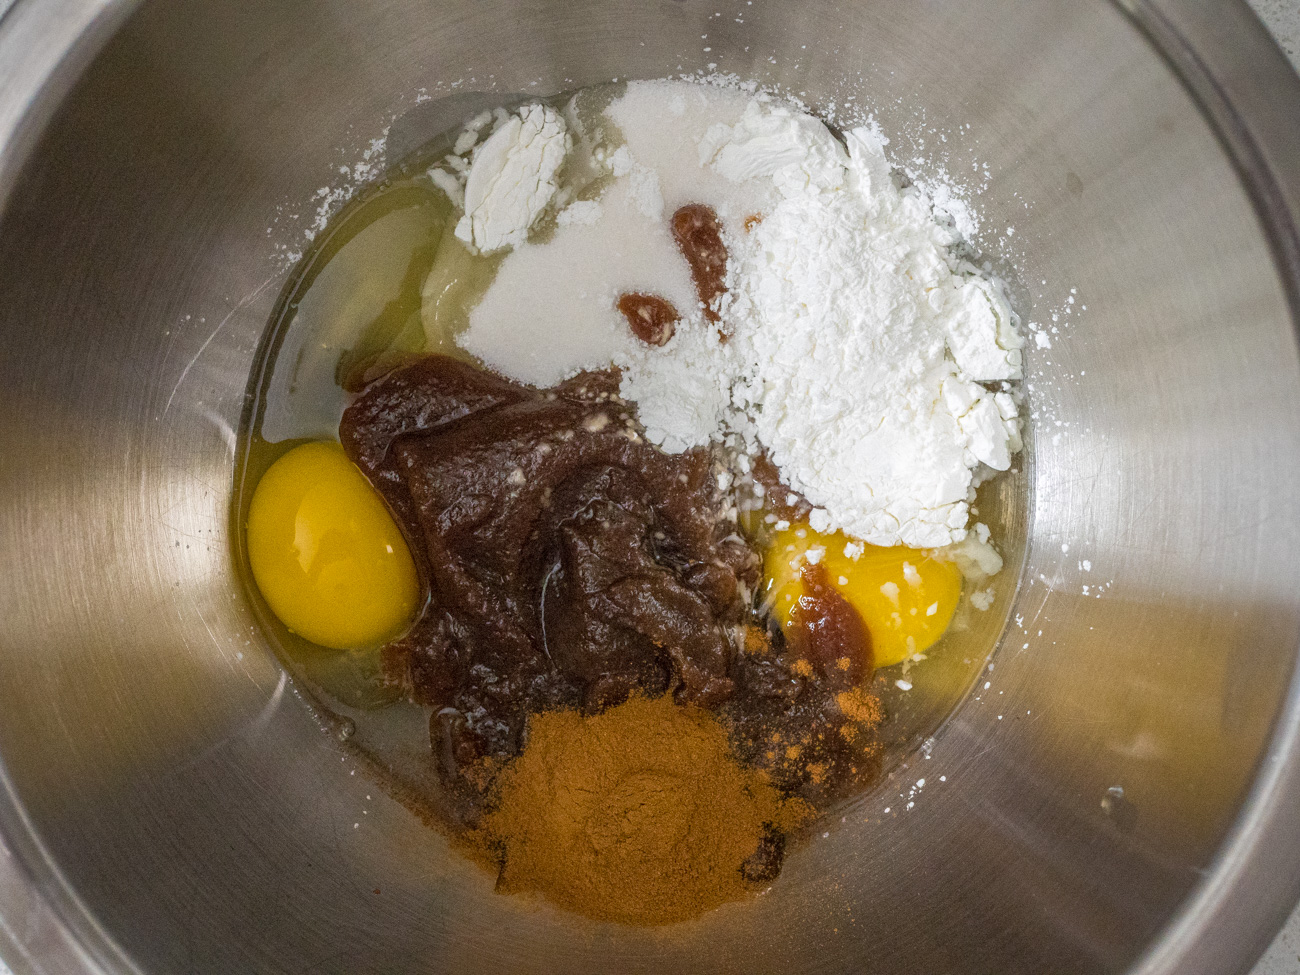 In a medium-sized bowl, beat eggs, sugar, cornstarch, cinnamon, and apple butter until thoroughly combined. Add milk and whisk together.